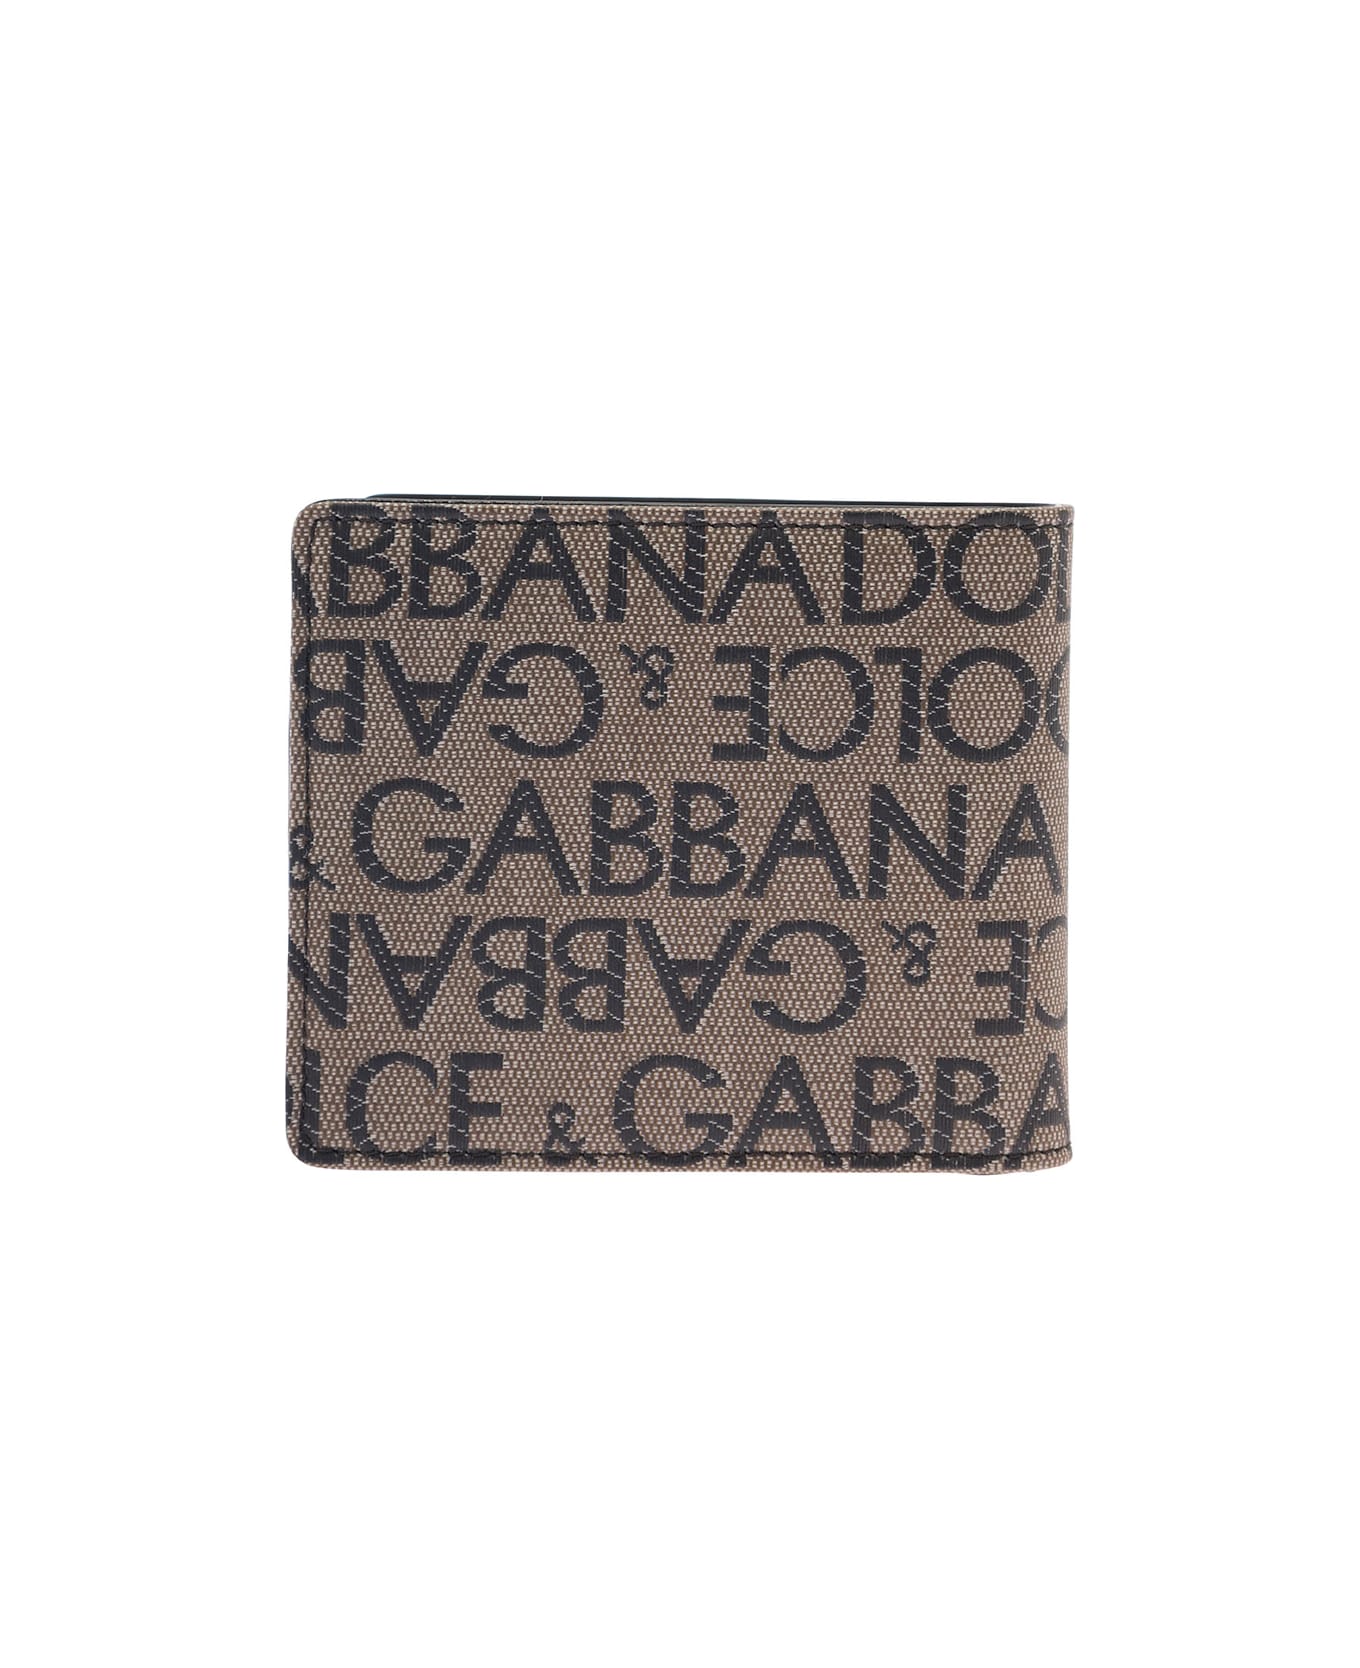 Dolce & Gabbana Beige Bi-fold Wallet With All-over Jacquard Logo In Coated Canvas Man - Beige